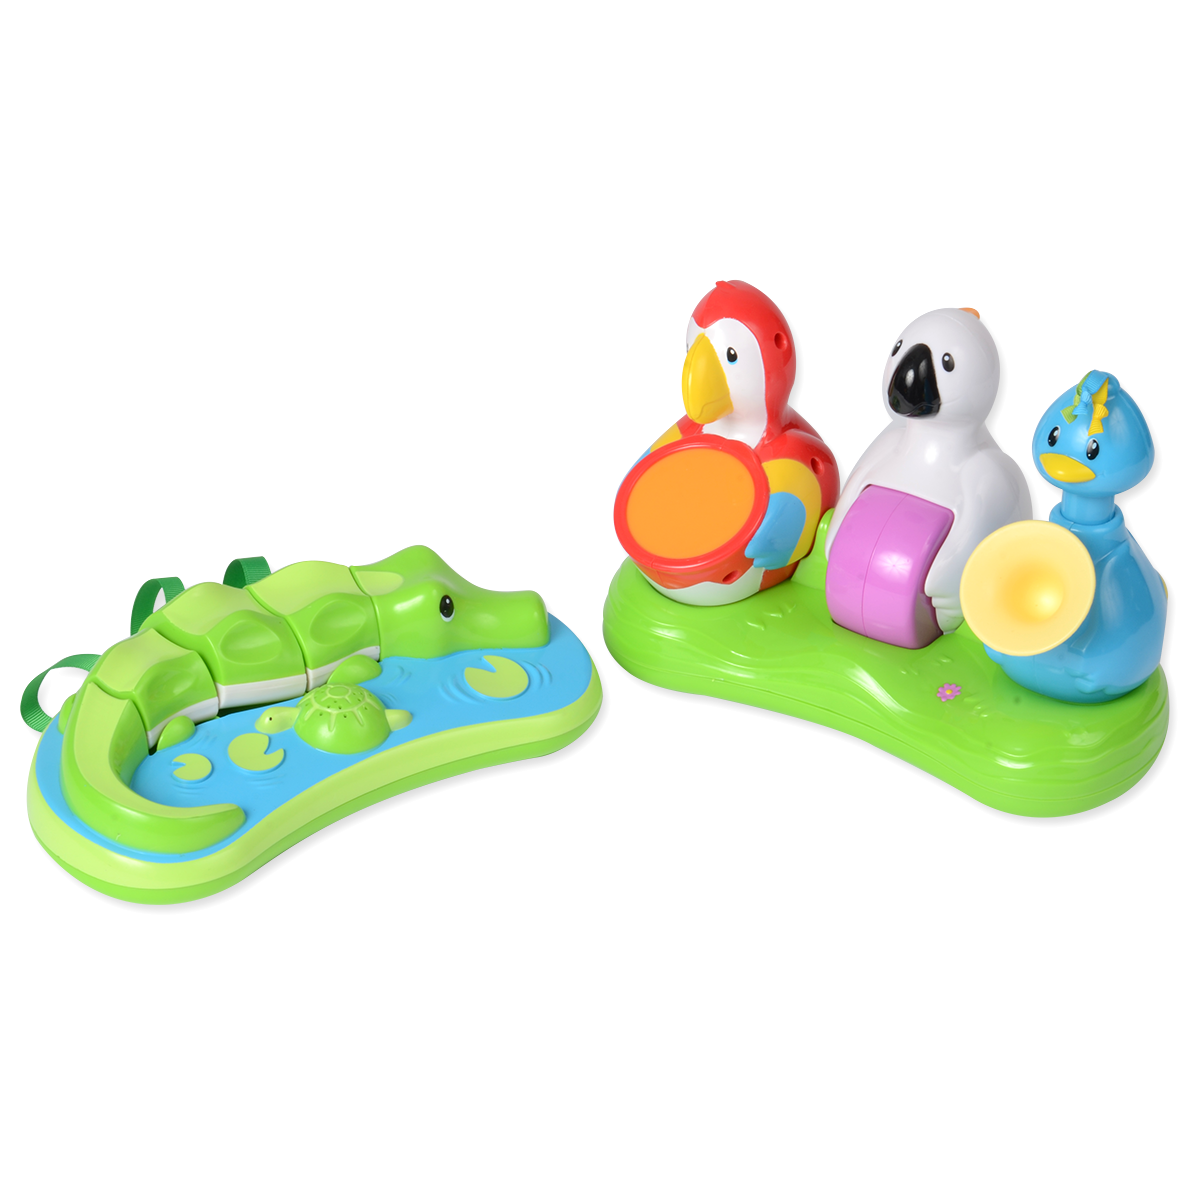 Triple Fun Activity Centers Replacement